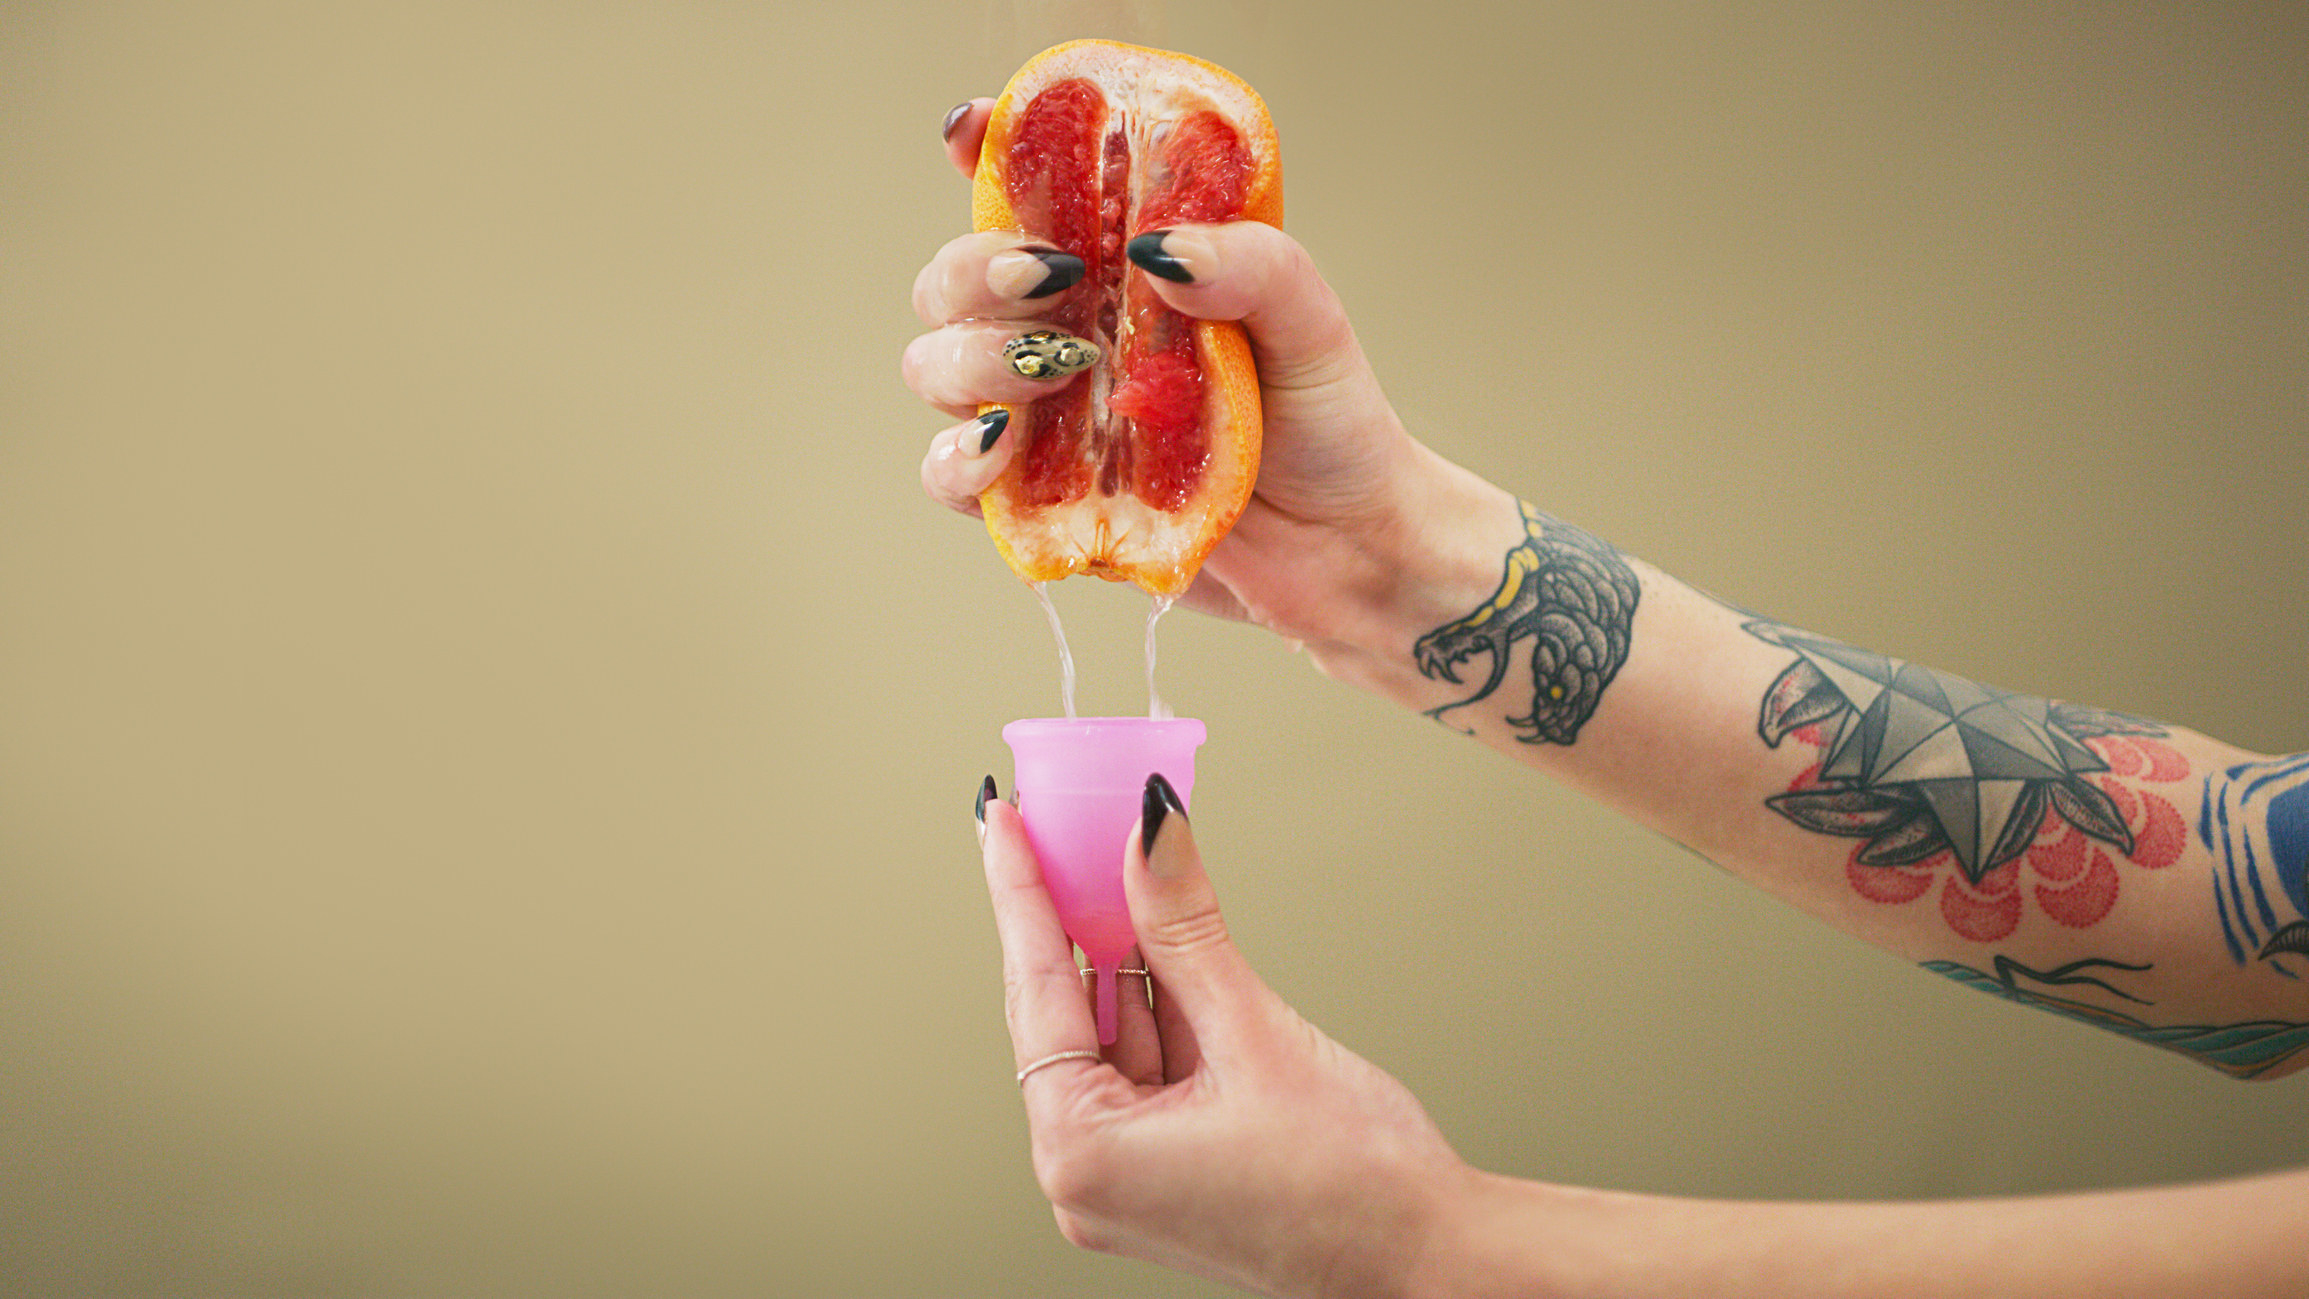 Stock image of a woman holding a menstrual cup in her hand and squeezing the fruit of a grapefruit into said cup